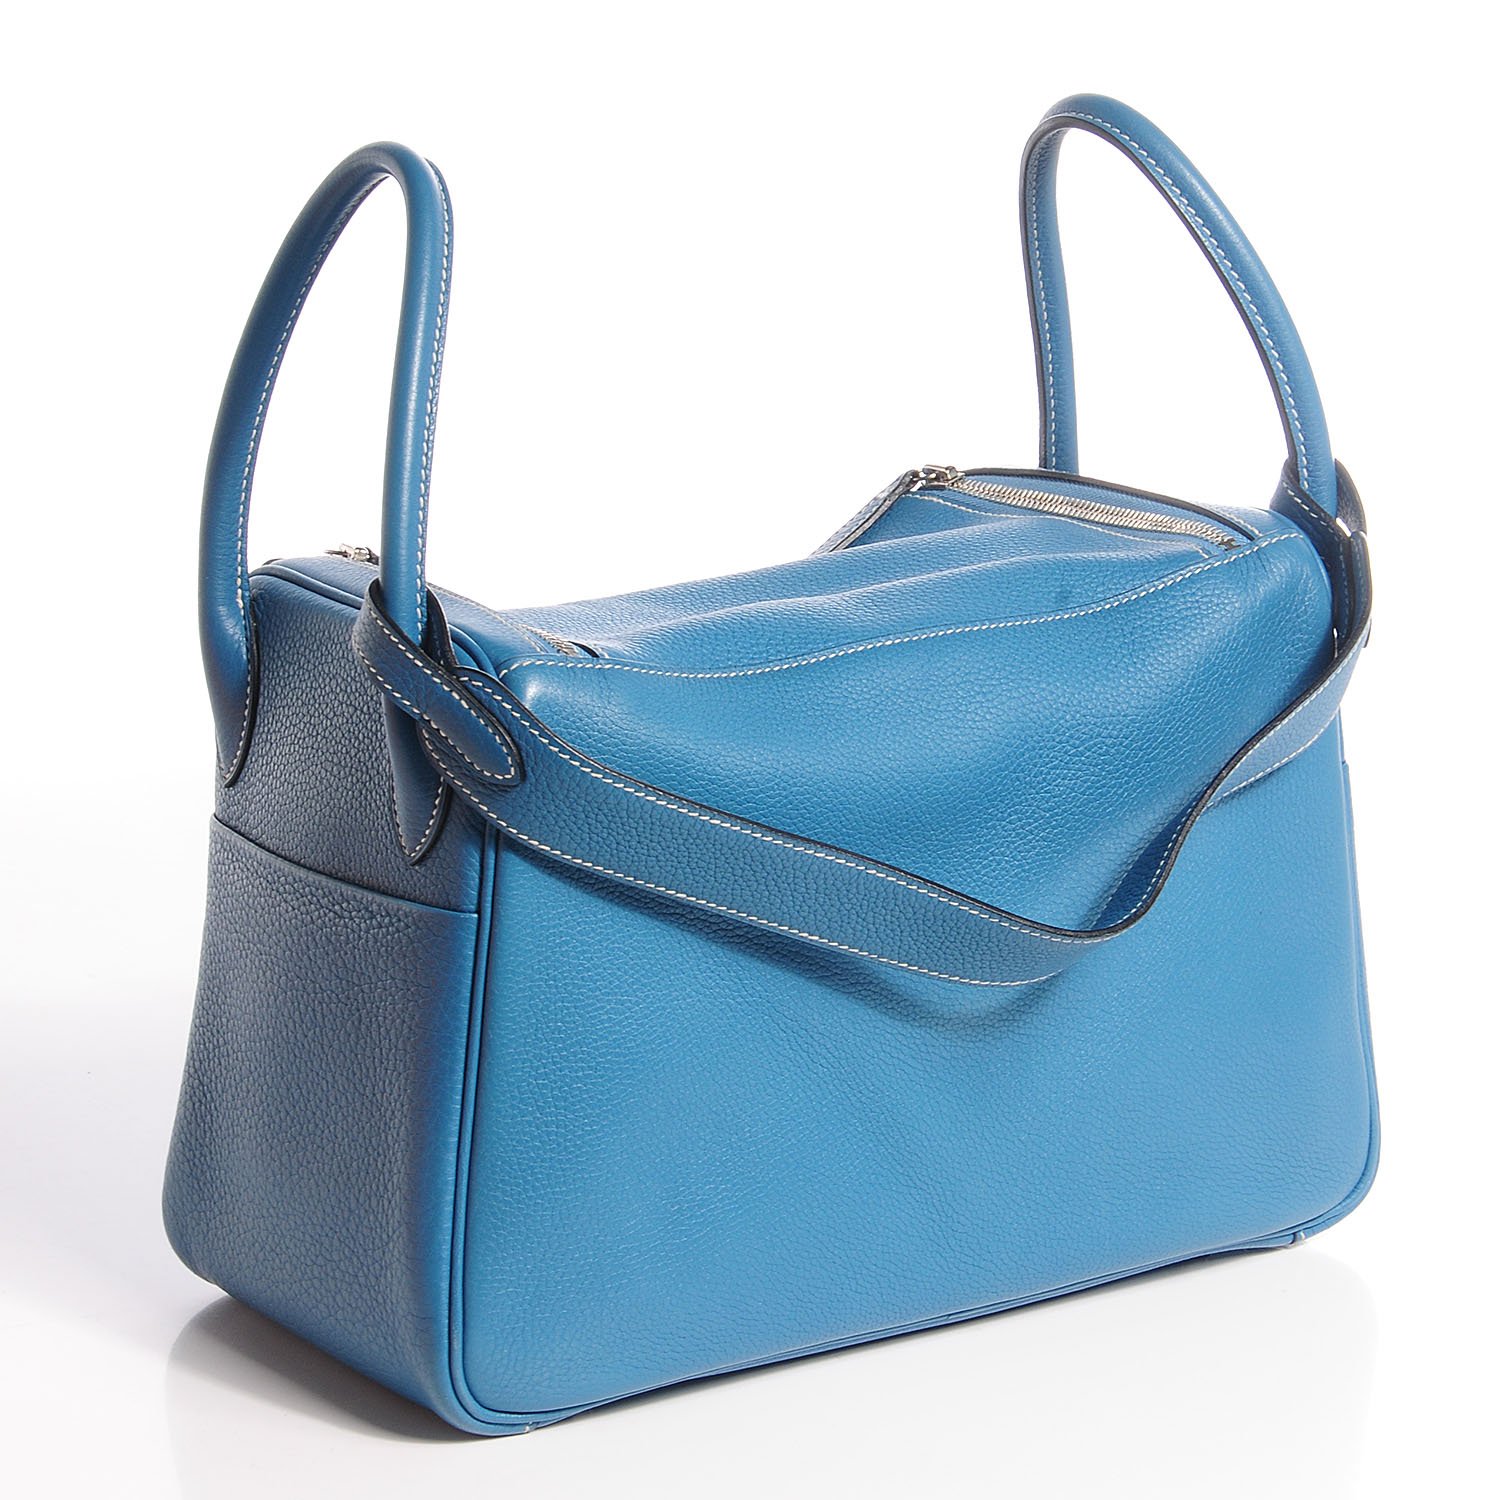 HERMES Taurillon Clemence Lindy 30 Blue Jean 77551